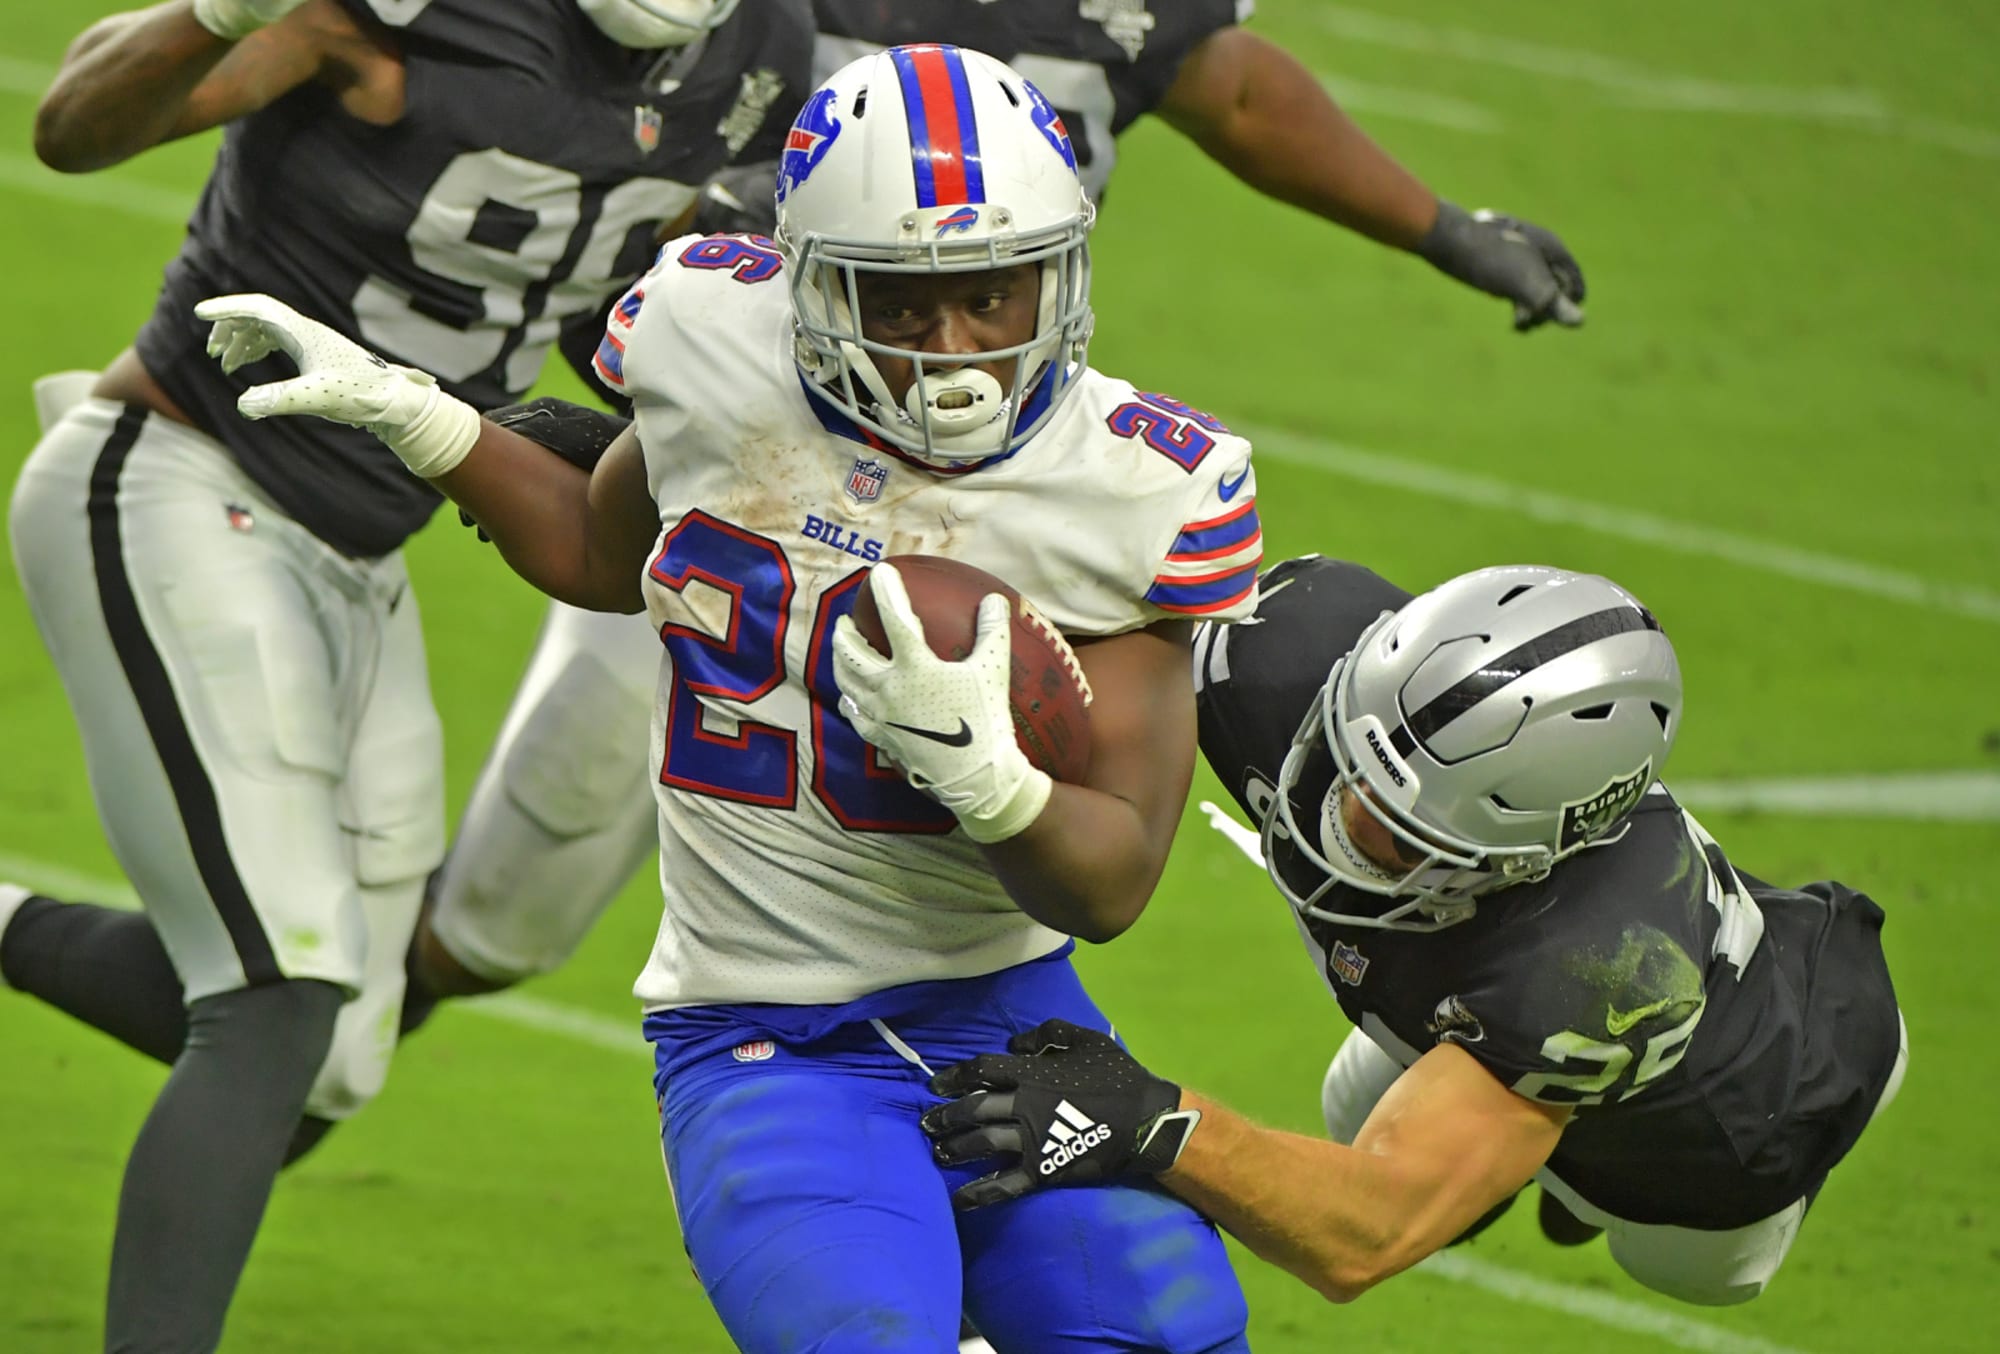 Ranking the Buffalo Bills RBs in the AFC East entering 2022